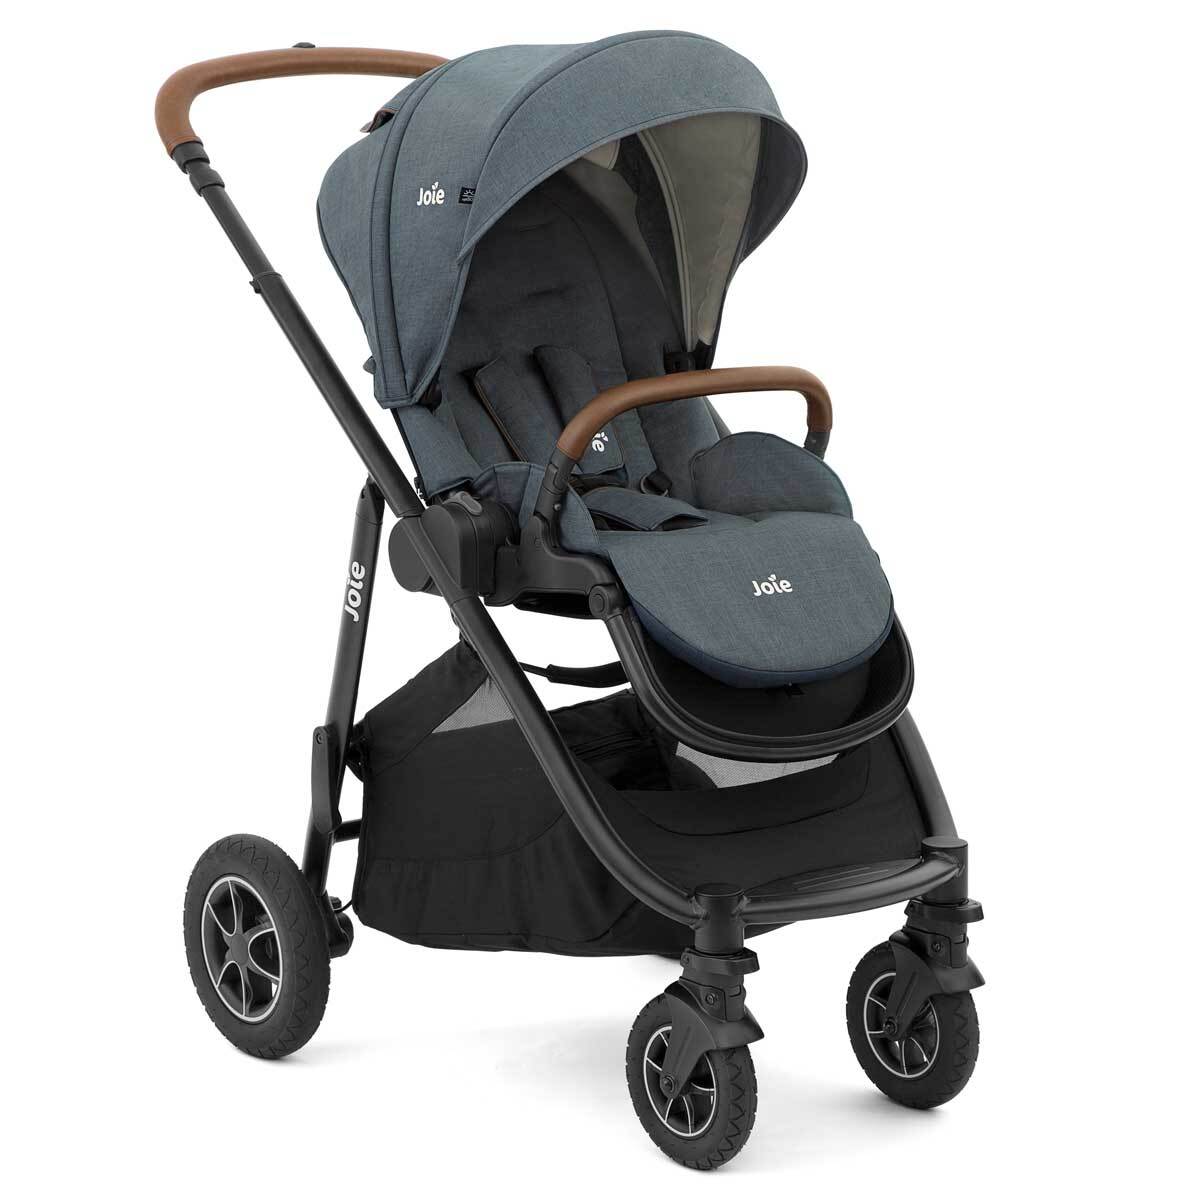 Joie Versatrax in Lagoon Multi-mode Pushchair | Early Learning Centre